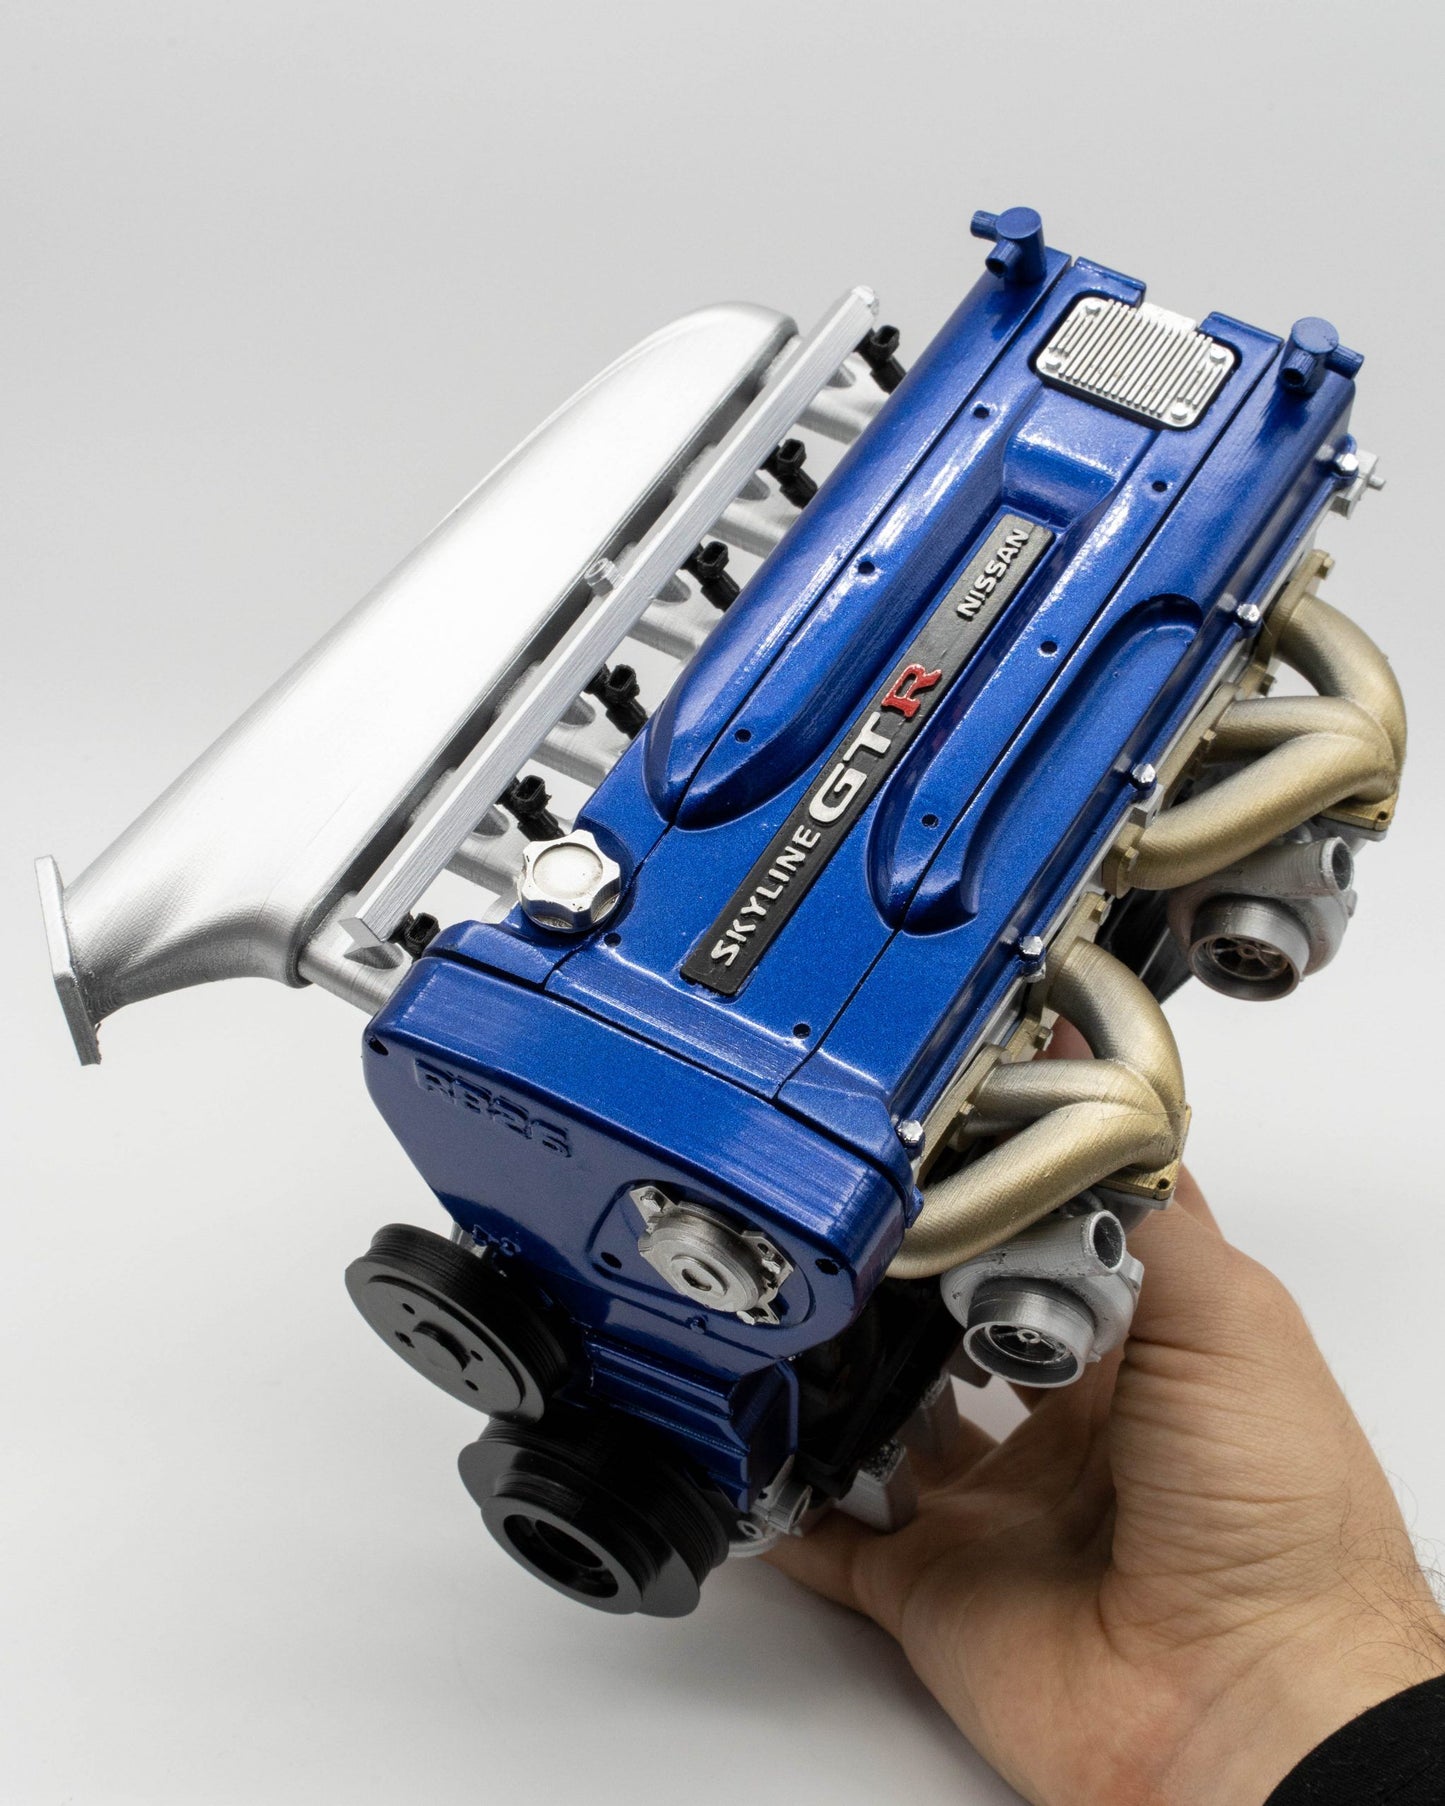 1/4 RB26 Scale Engine - Assembled